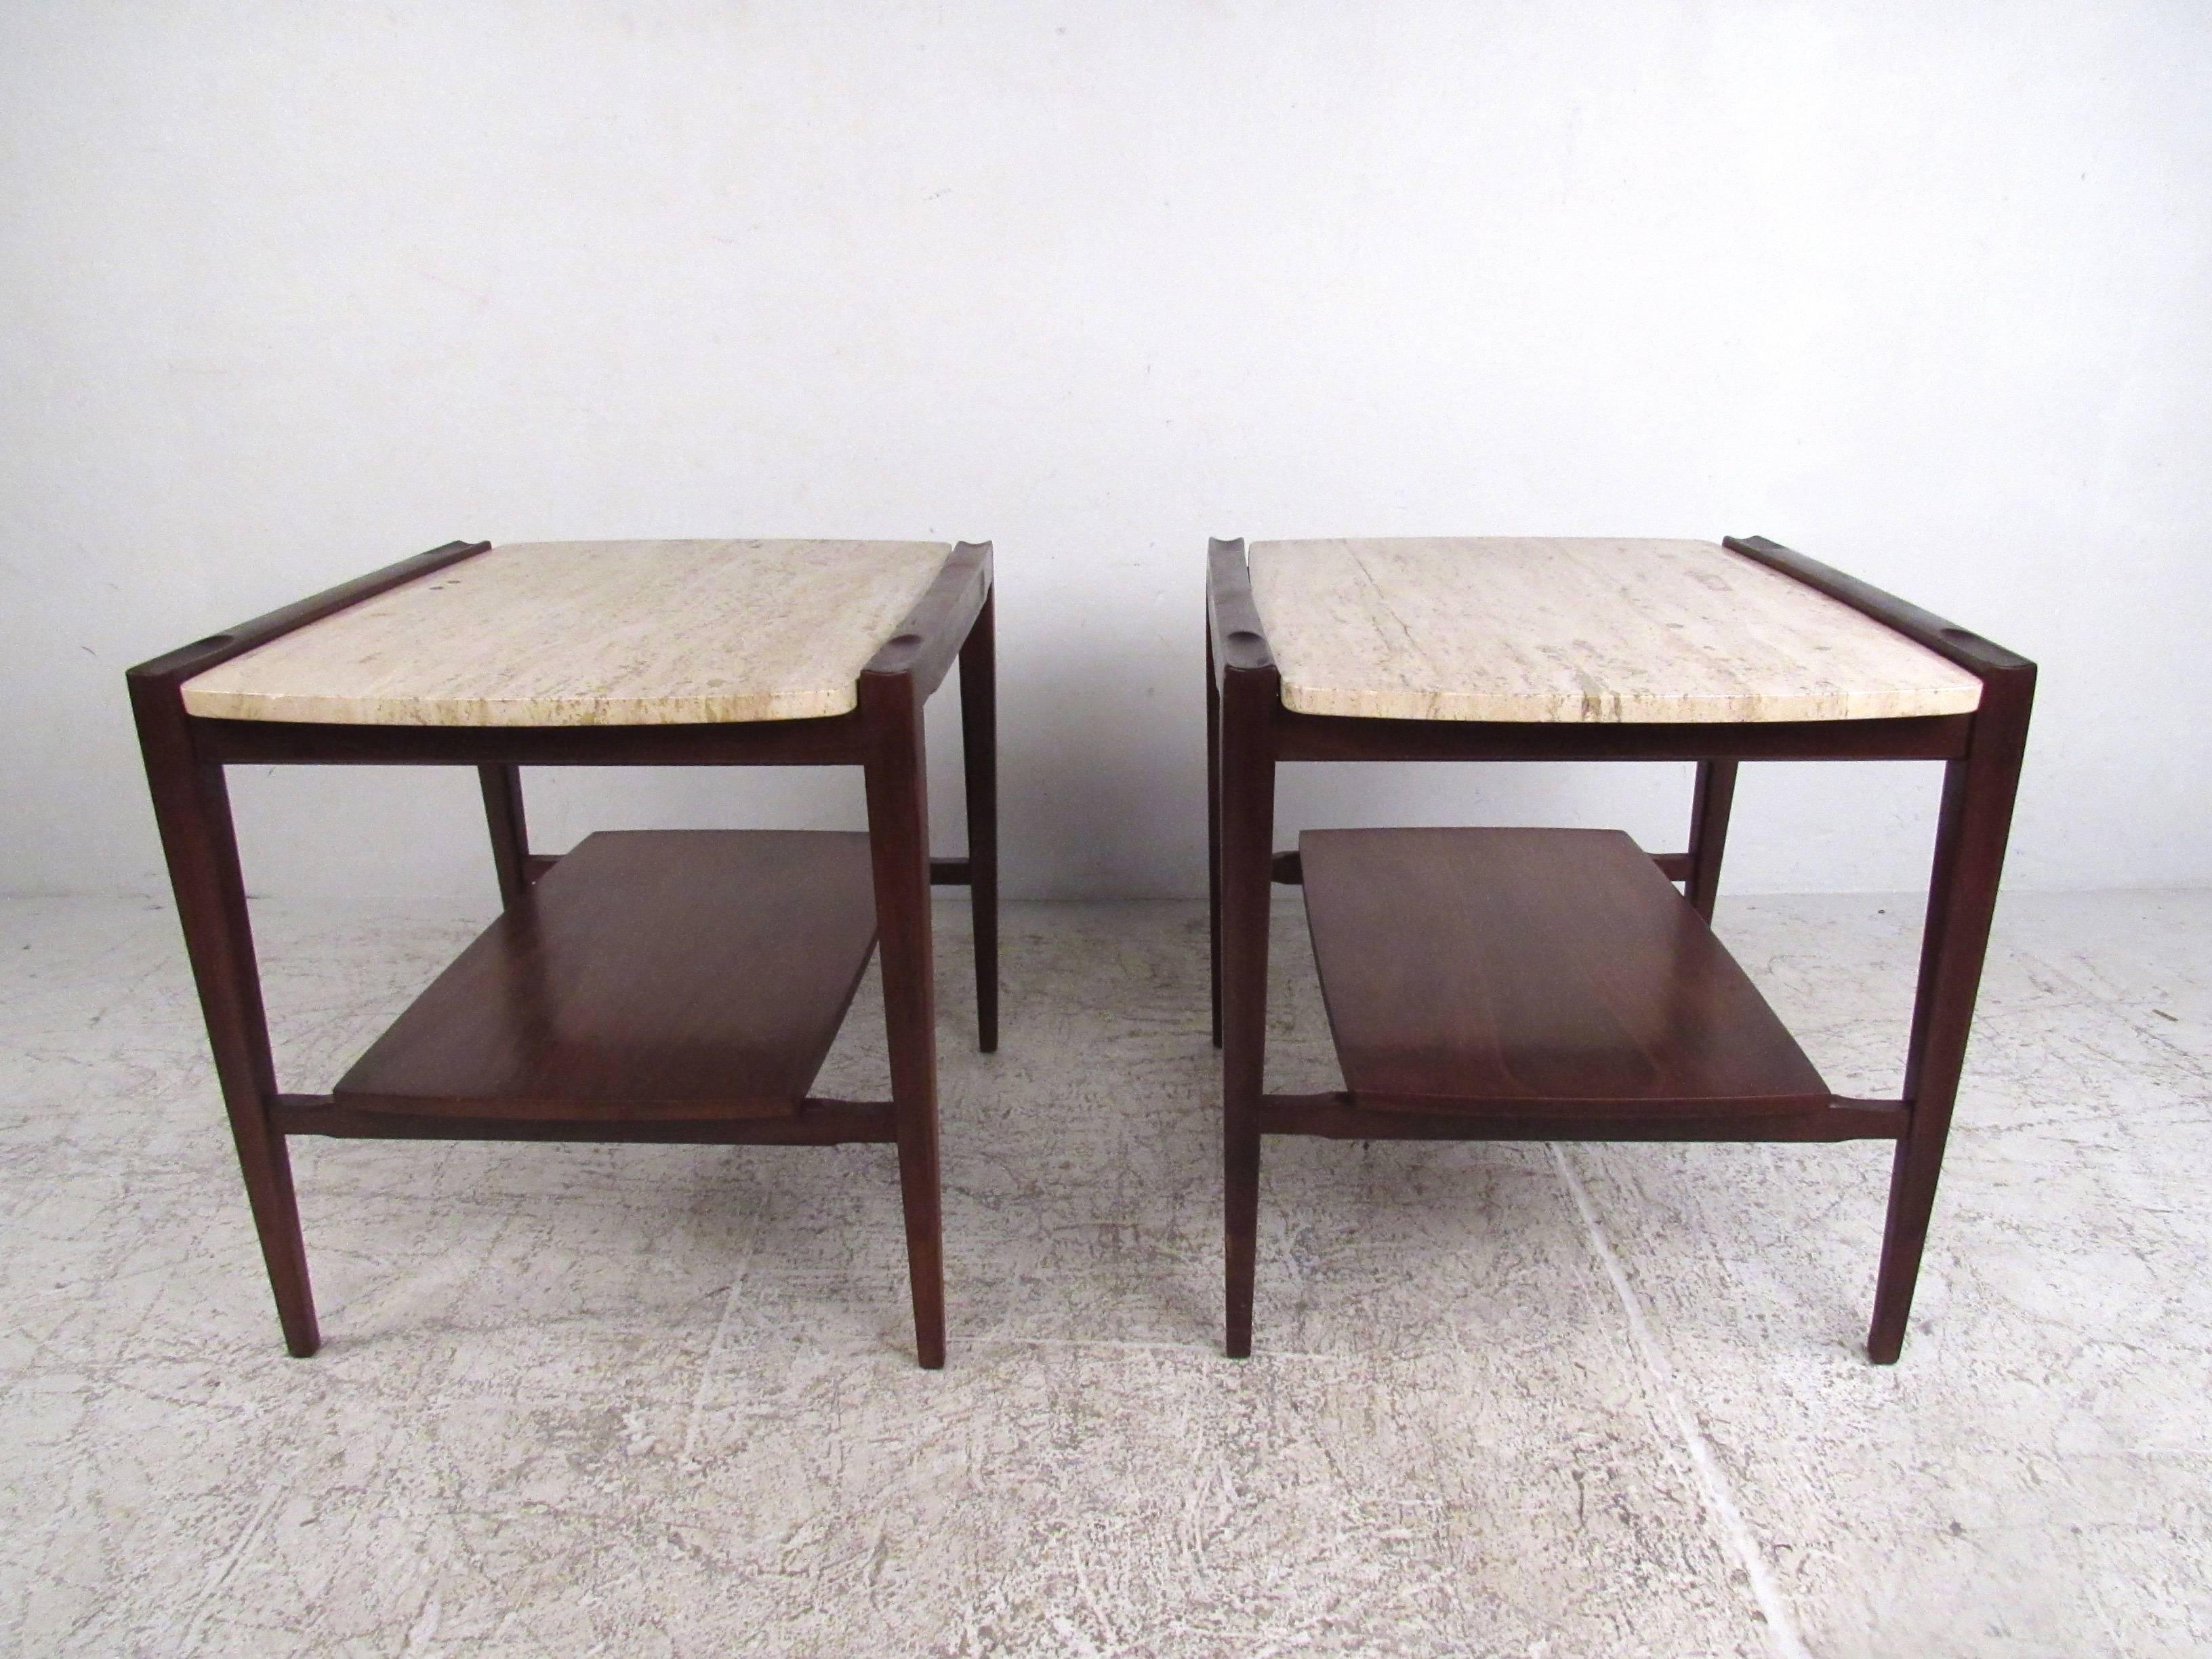 This stylish pair of Mid-Century end tables features unique two-tier design with tapered legs, white marble tops, and unique raised edge design. A dark vintage walnut finish and curved sides on the lower tier add to the allure. Wonderful vintage